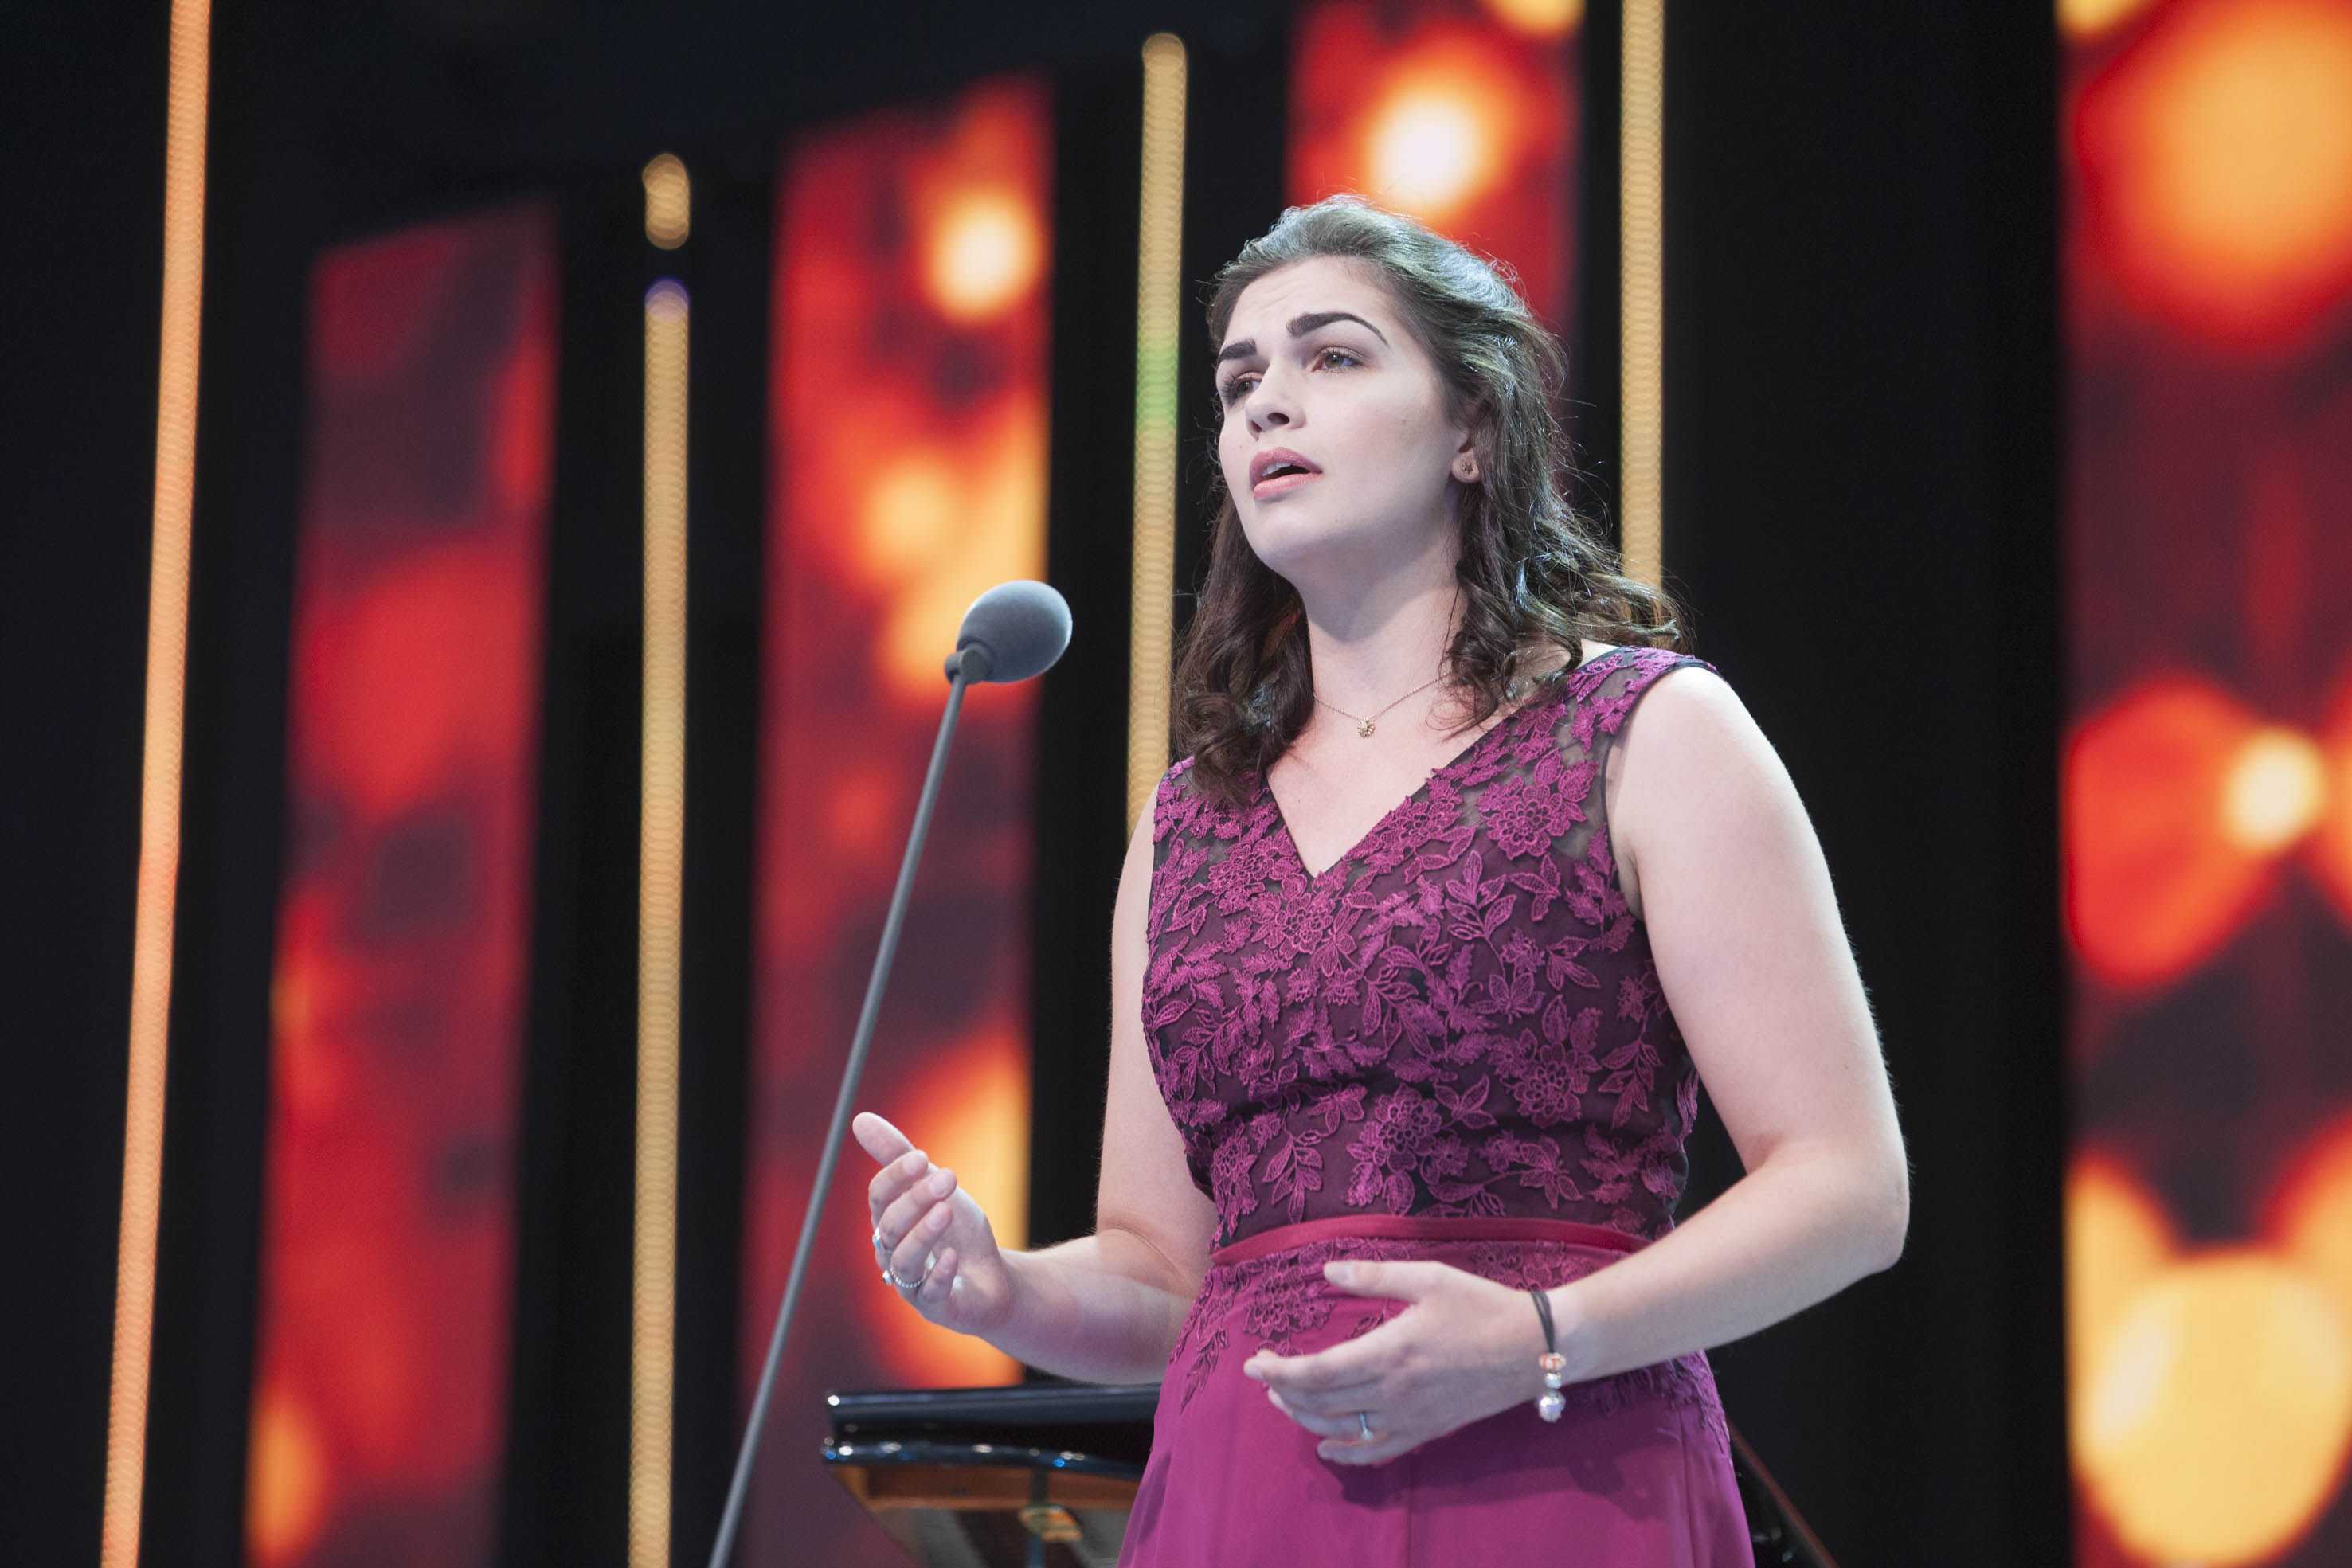 New singing star Rachel living the dream after first solo competition success